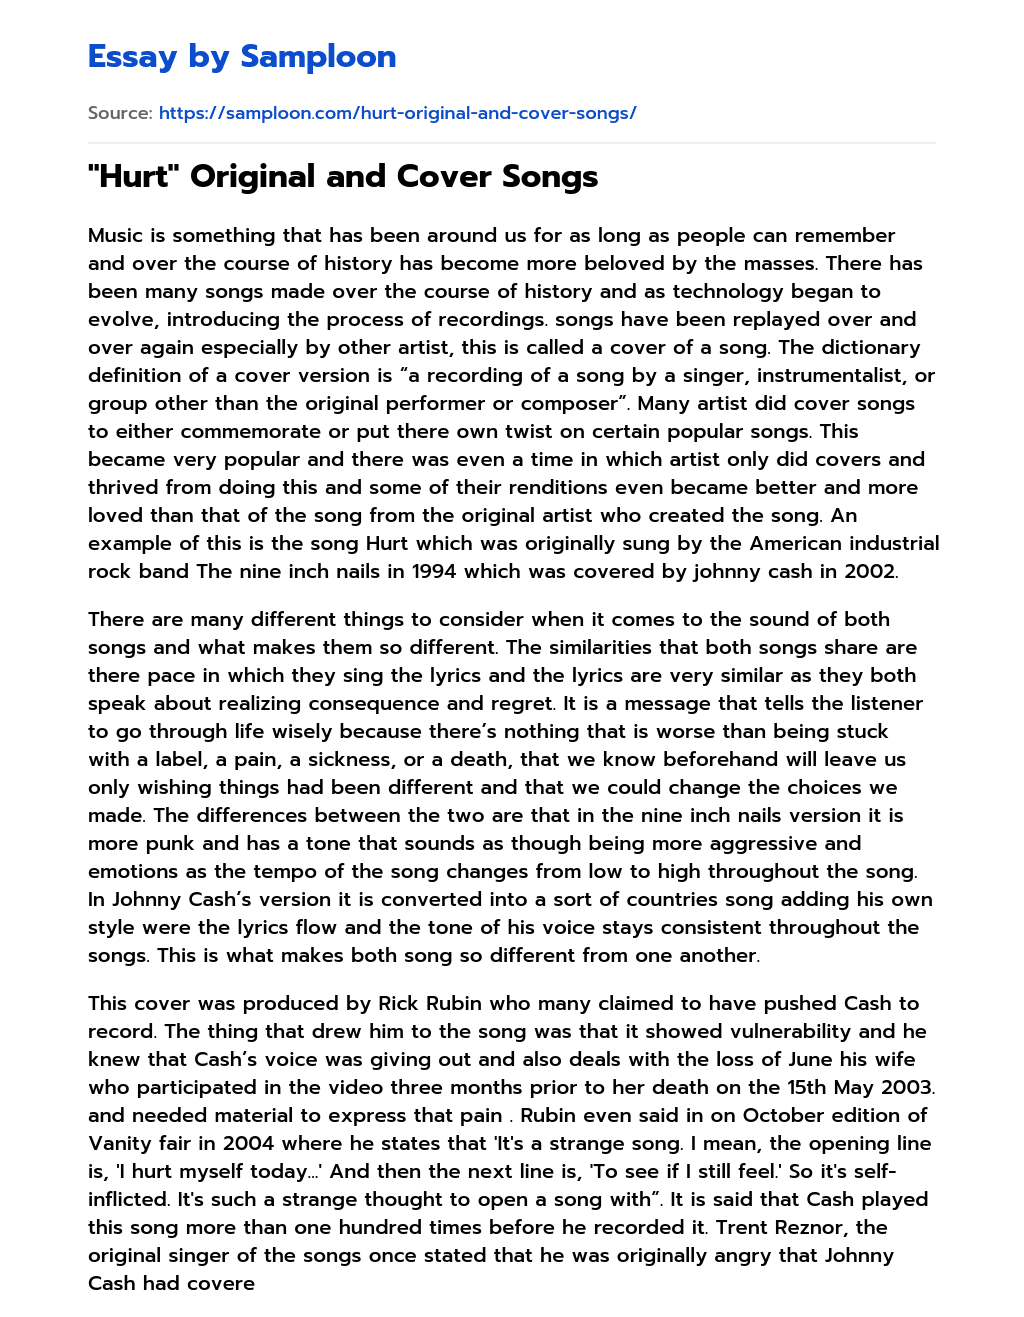 “Hurt” Original and Cover Songs essay